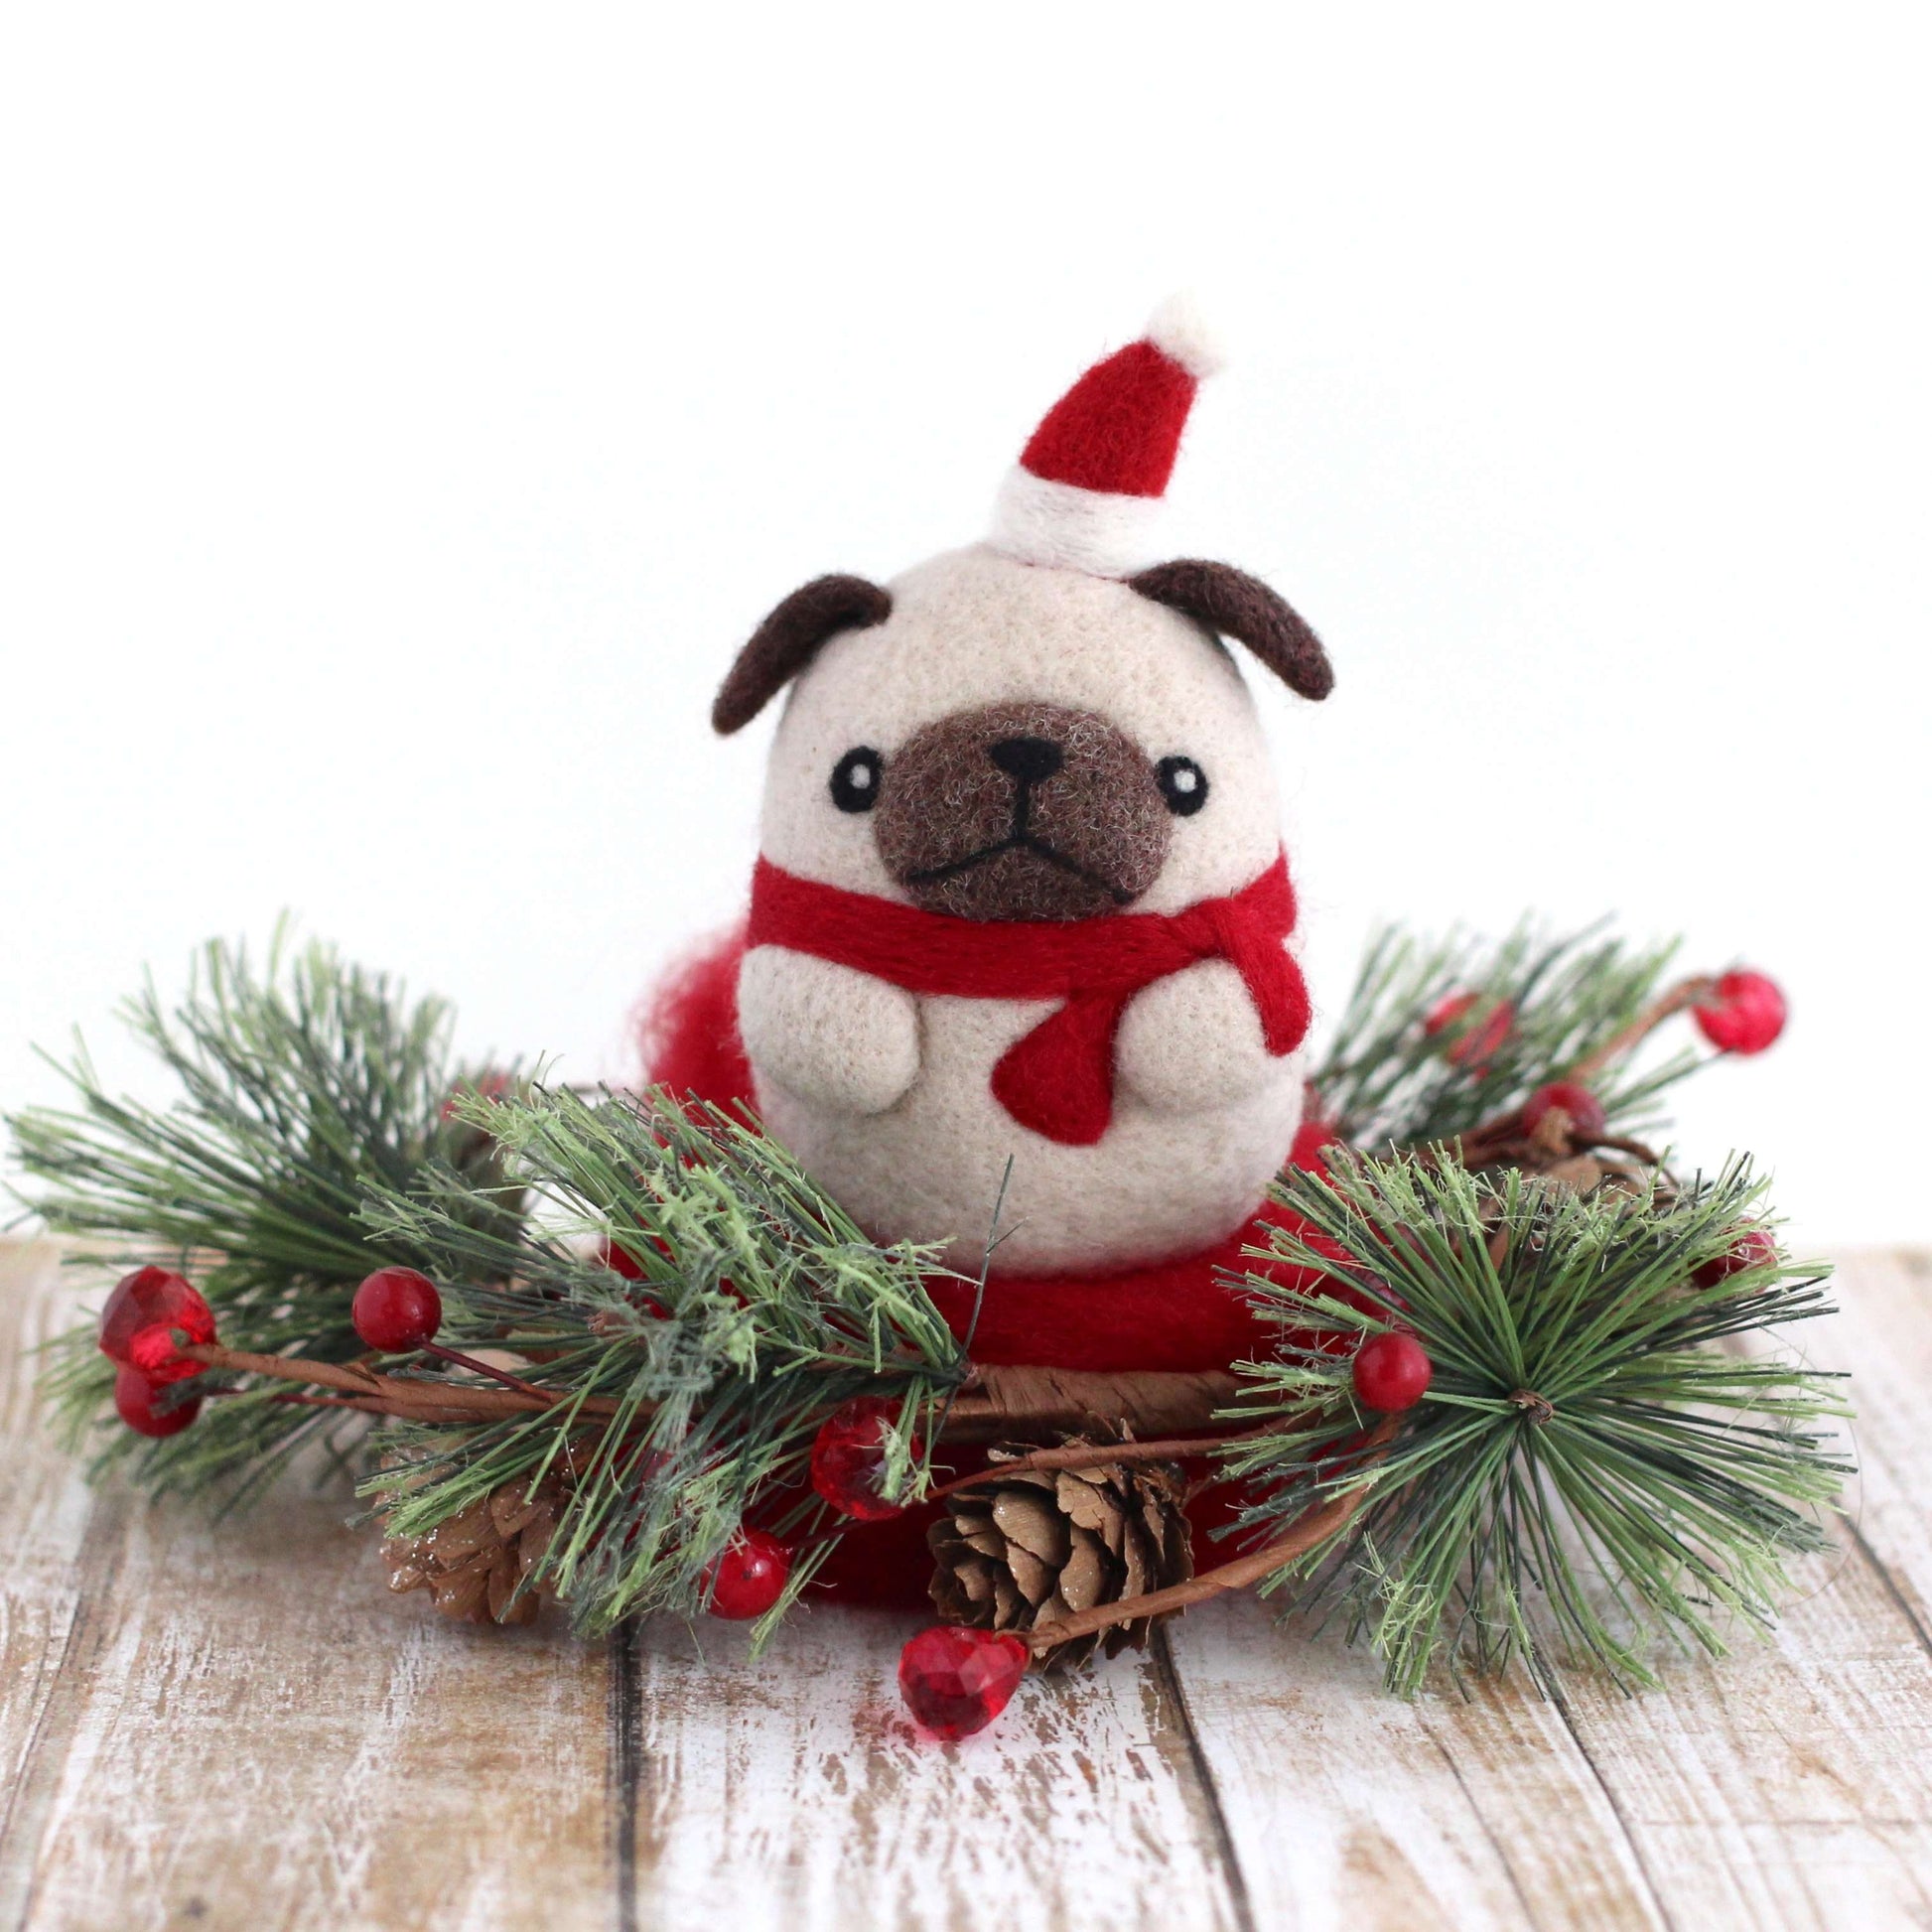 Needle Felted Pug with Santa Hat by Wild Whimsy Woolies